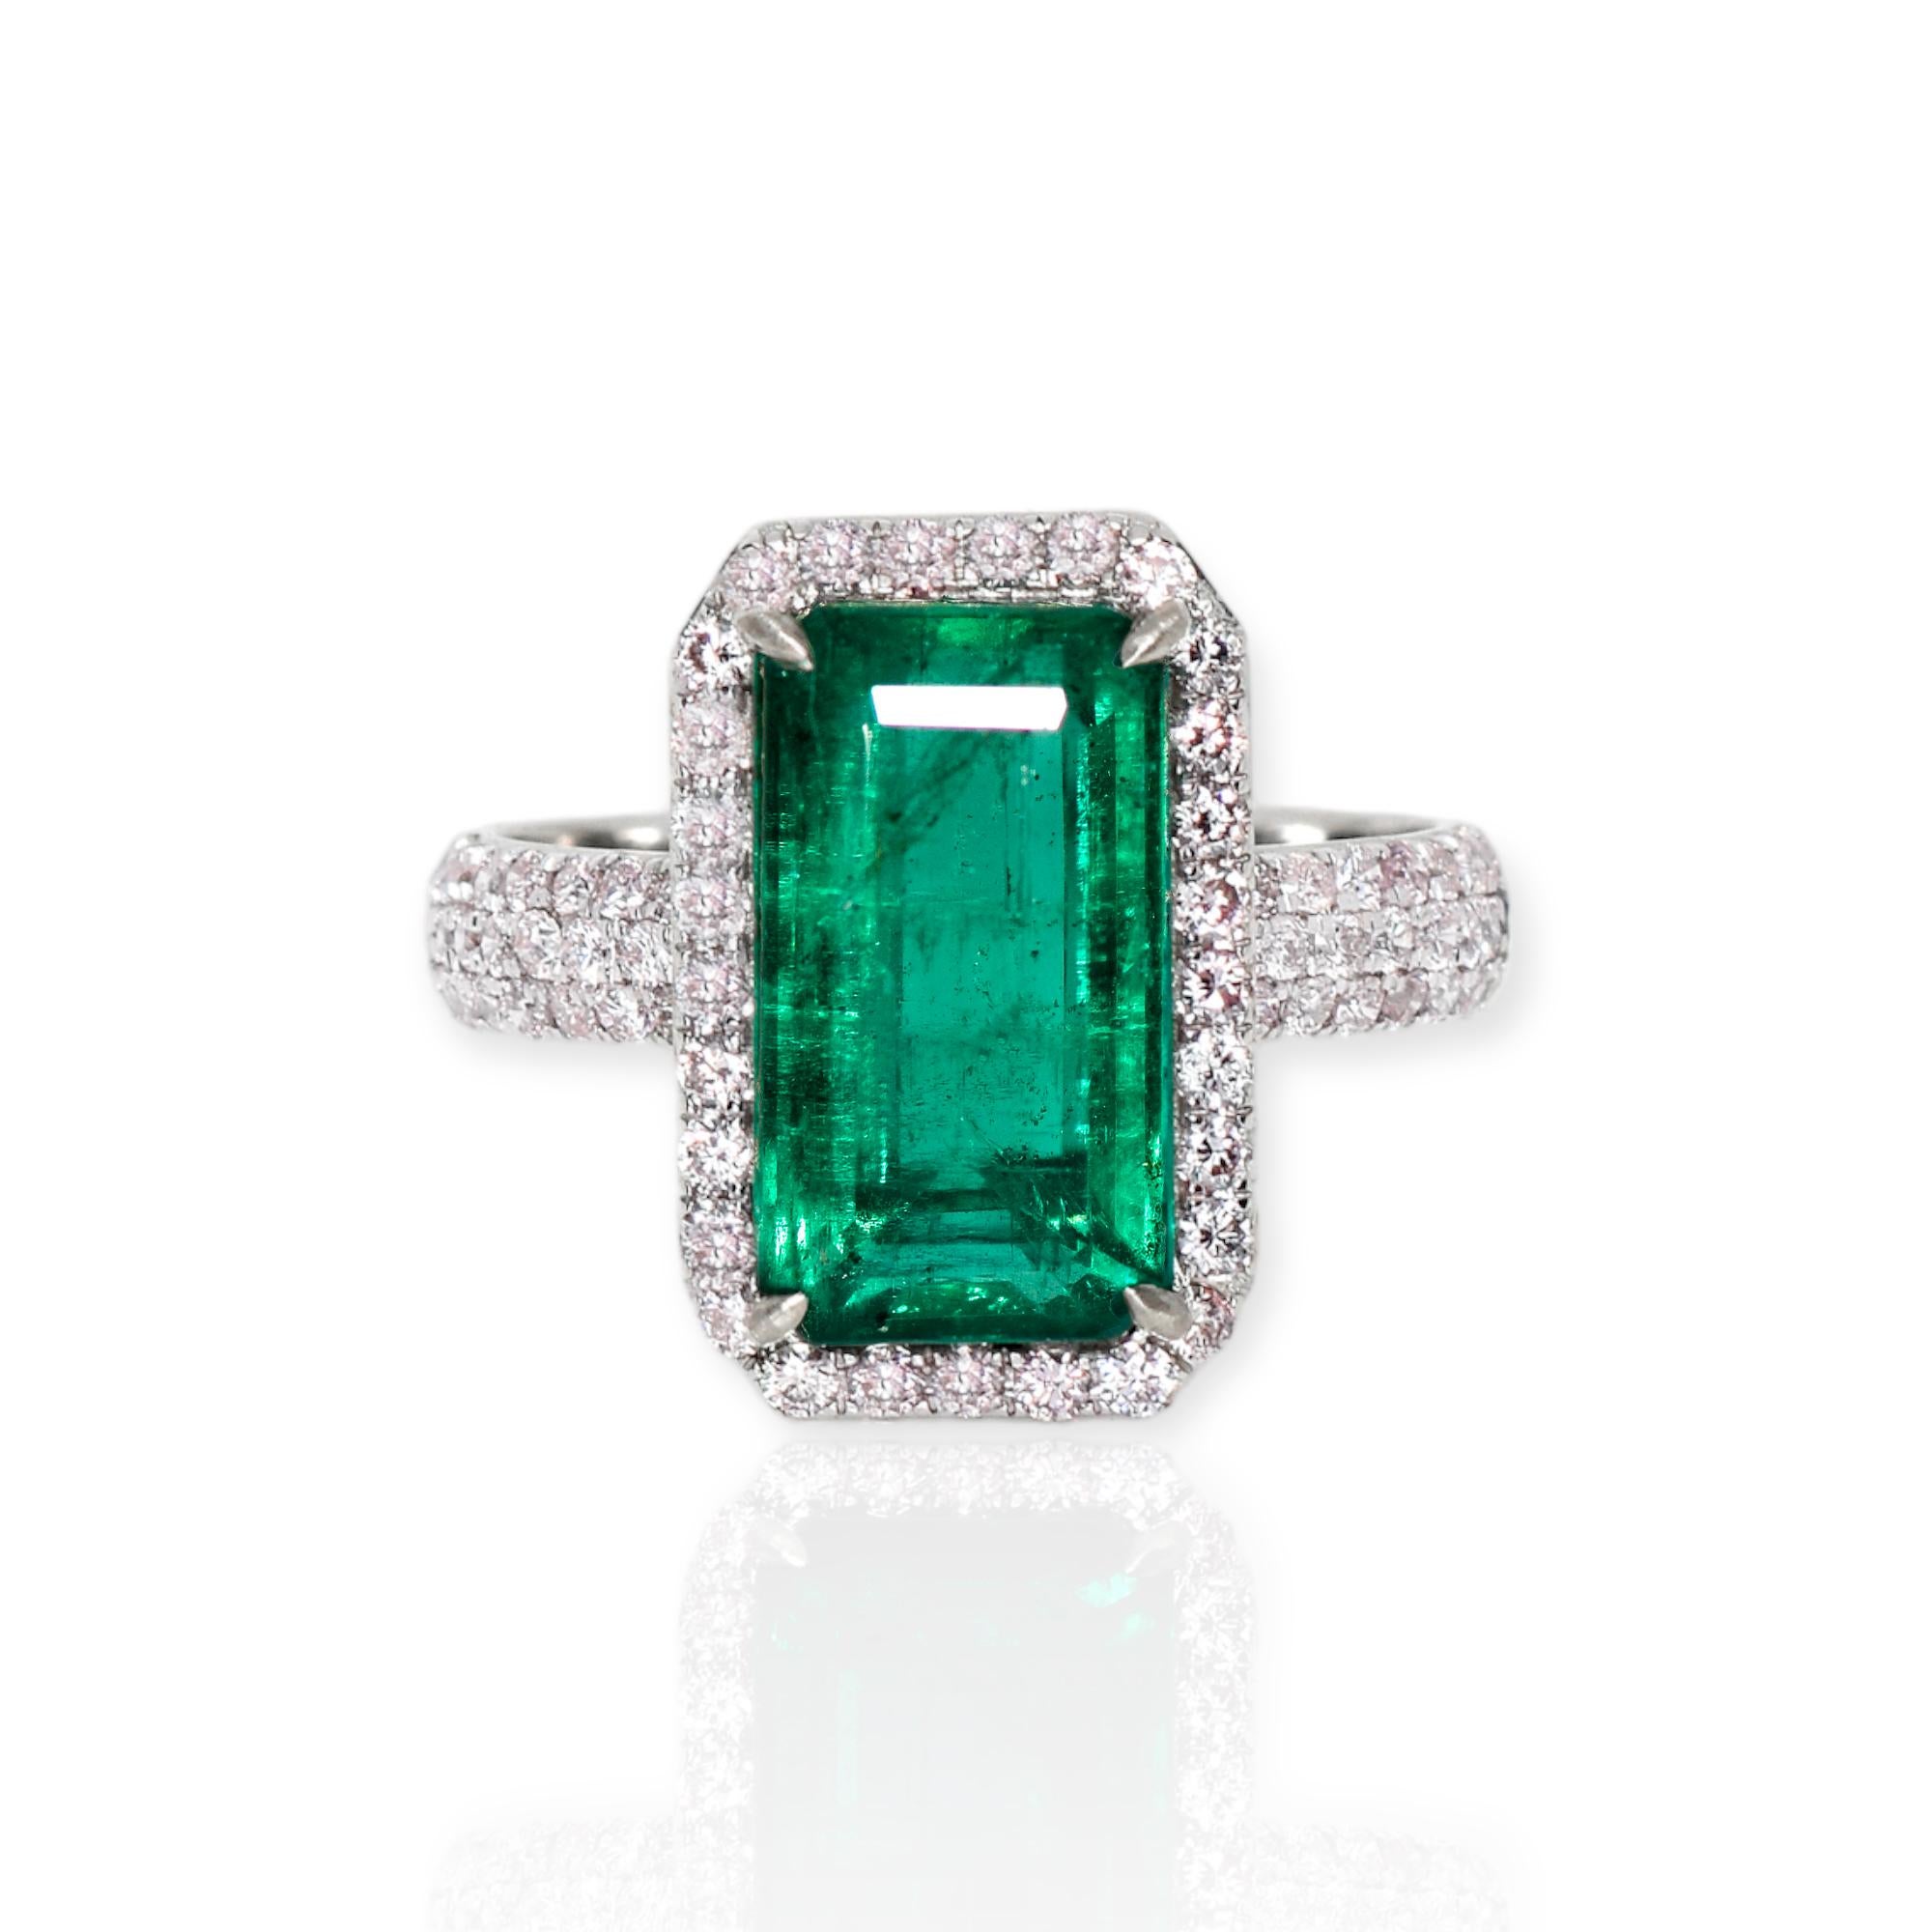 *IGI 14K 4.47 ct Natural Green Emerald&Pink Diamond Art Deco Engagement Ring*

IGI-certified natural Zambia intense green emerald weighing 4.47 ct set on the 14K white gold halos and 3-rows pave' design band with natural pink diamonds weighing 0.70